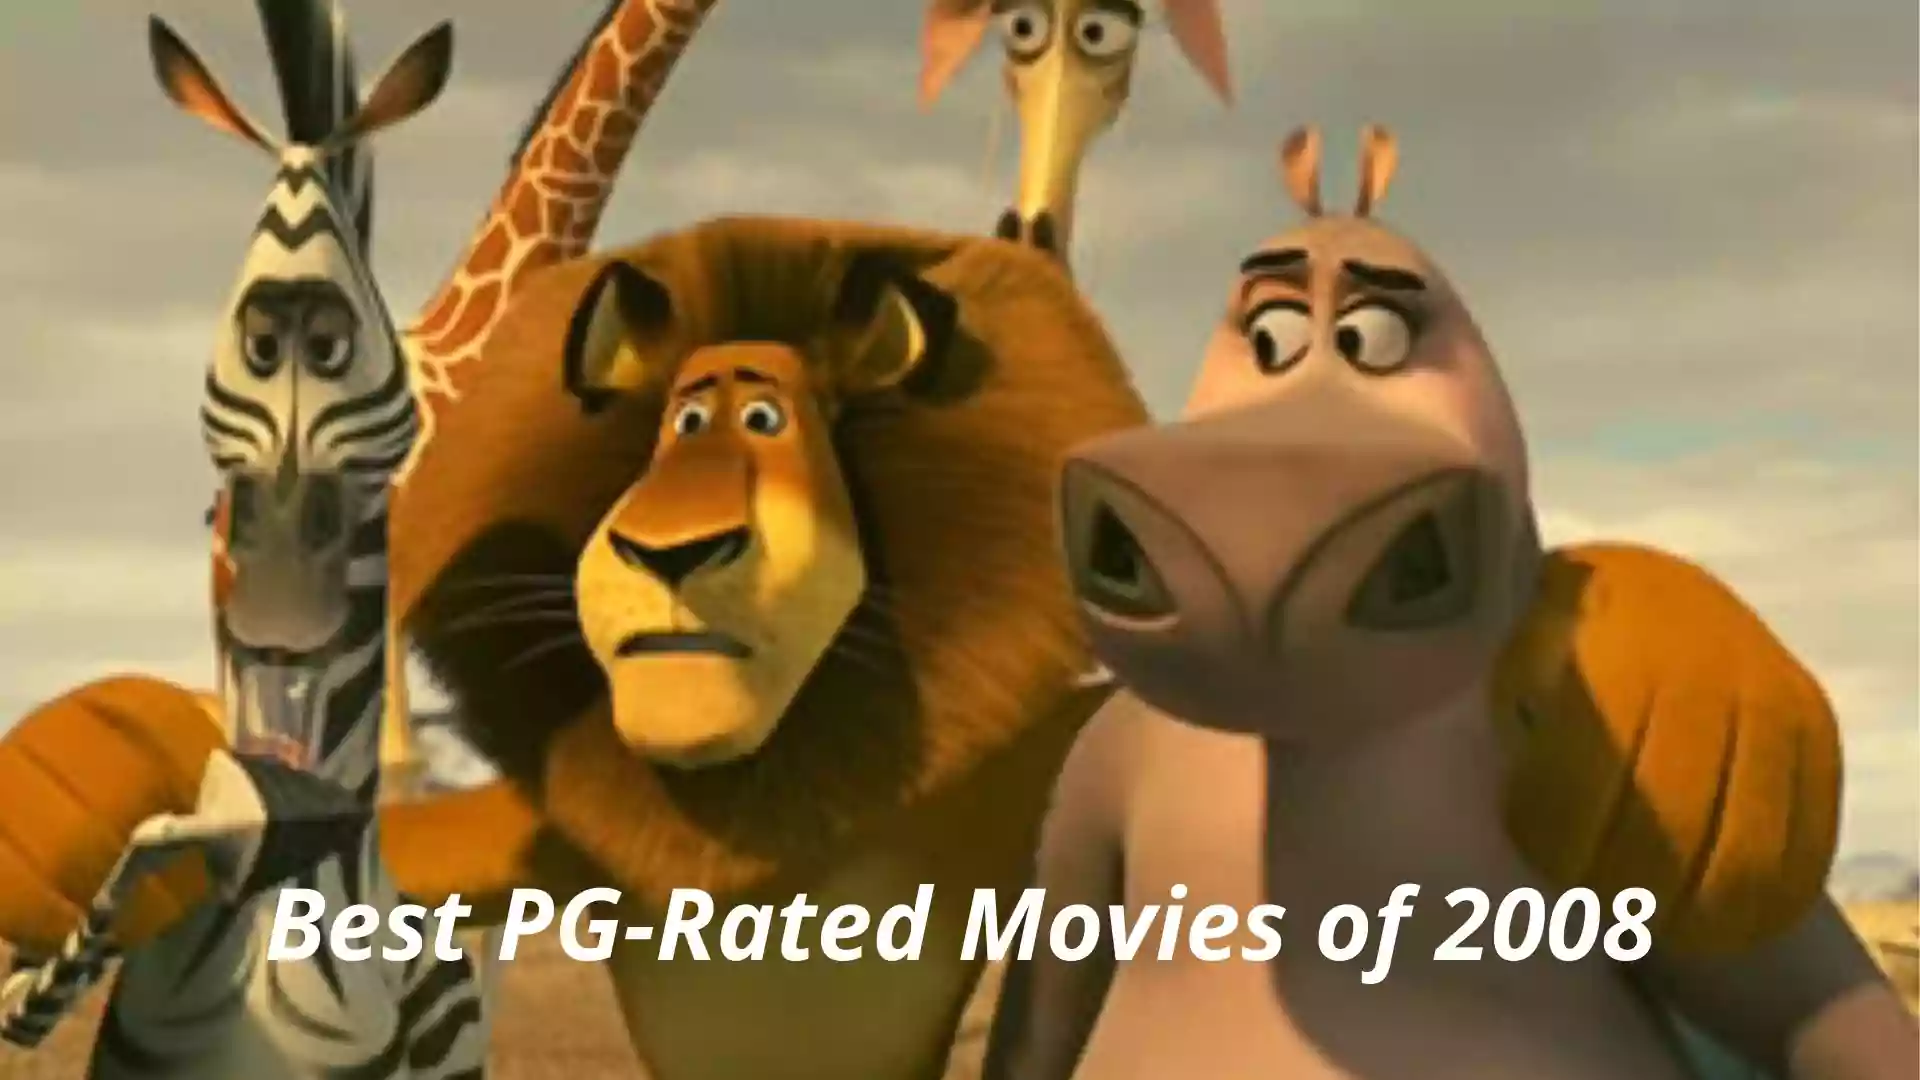 Best PG-Rated Movies of 2008